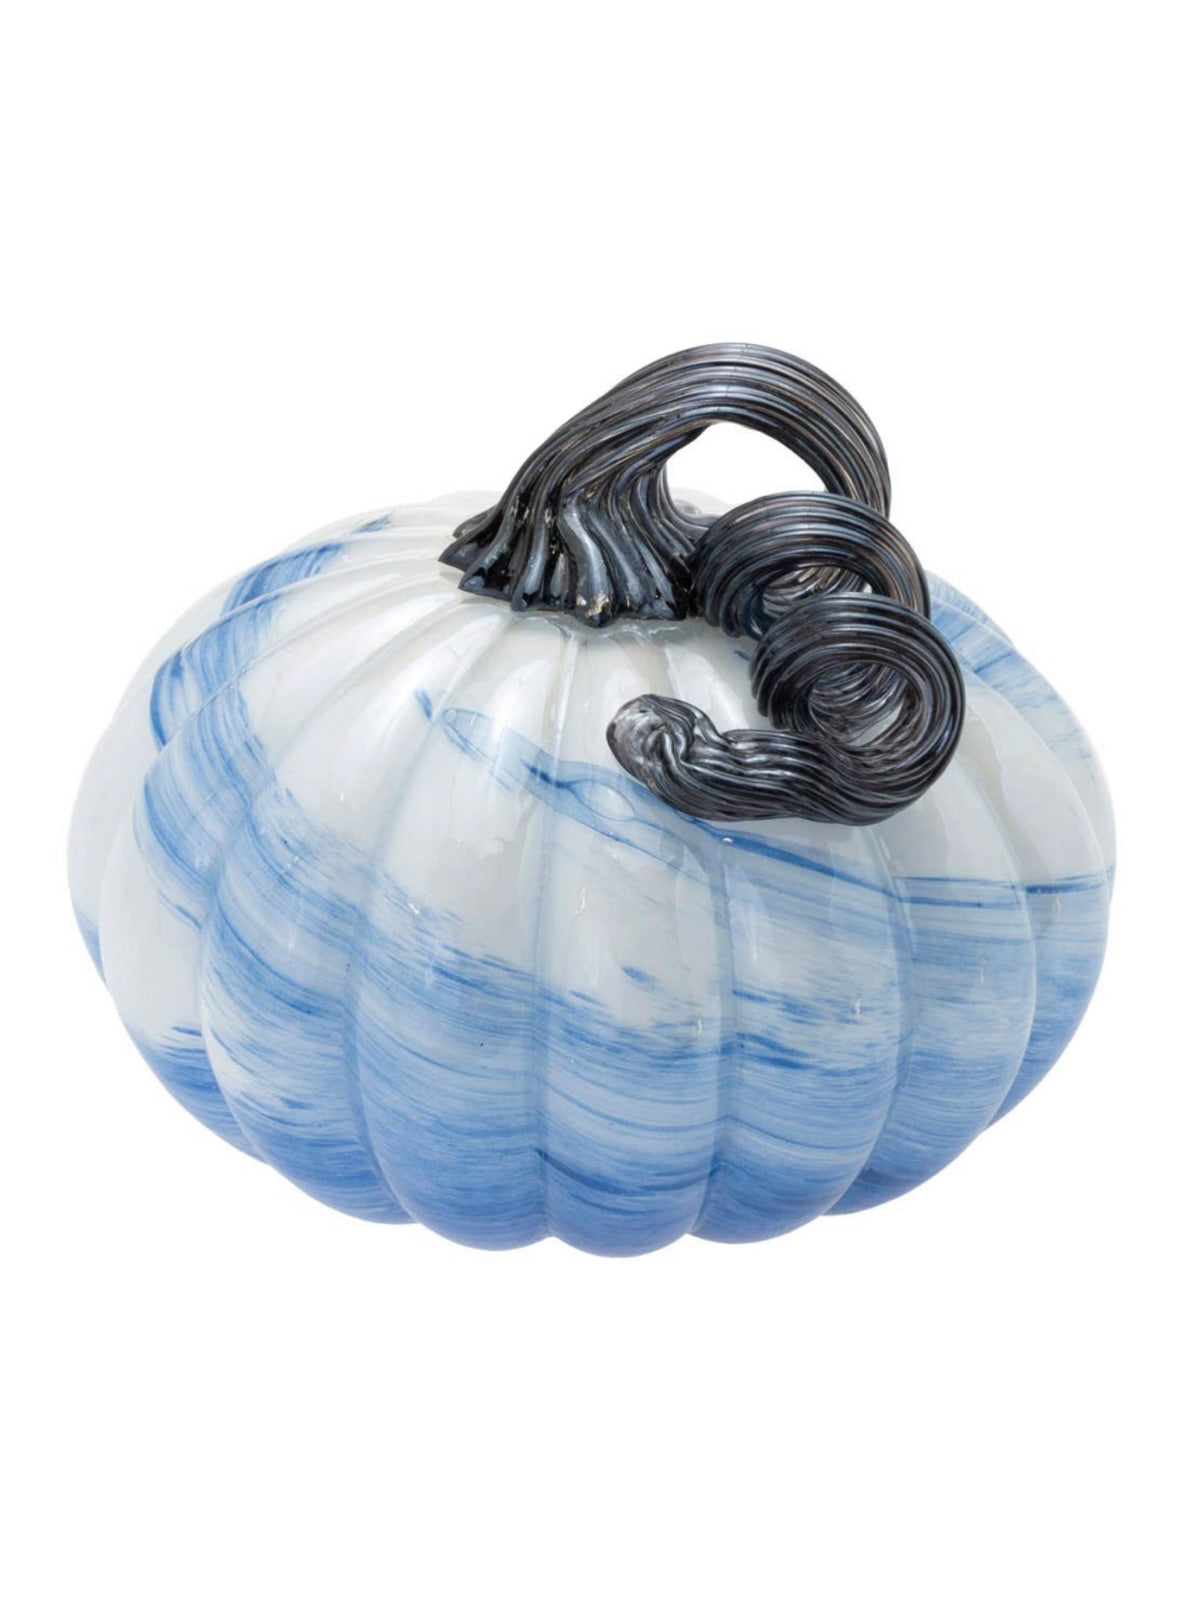 Add elegance to your fall decor with these gorgeous handcrafted glass pumpkins. This classic seasonal accent has a white and blue swirl color with a grey stem! A pretty pumpkin palette for your fall dining and decor.